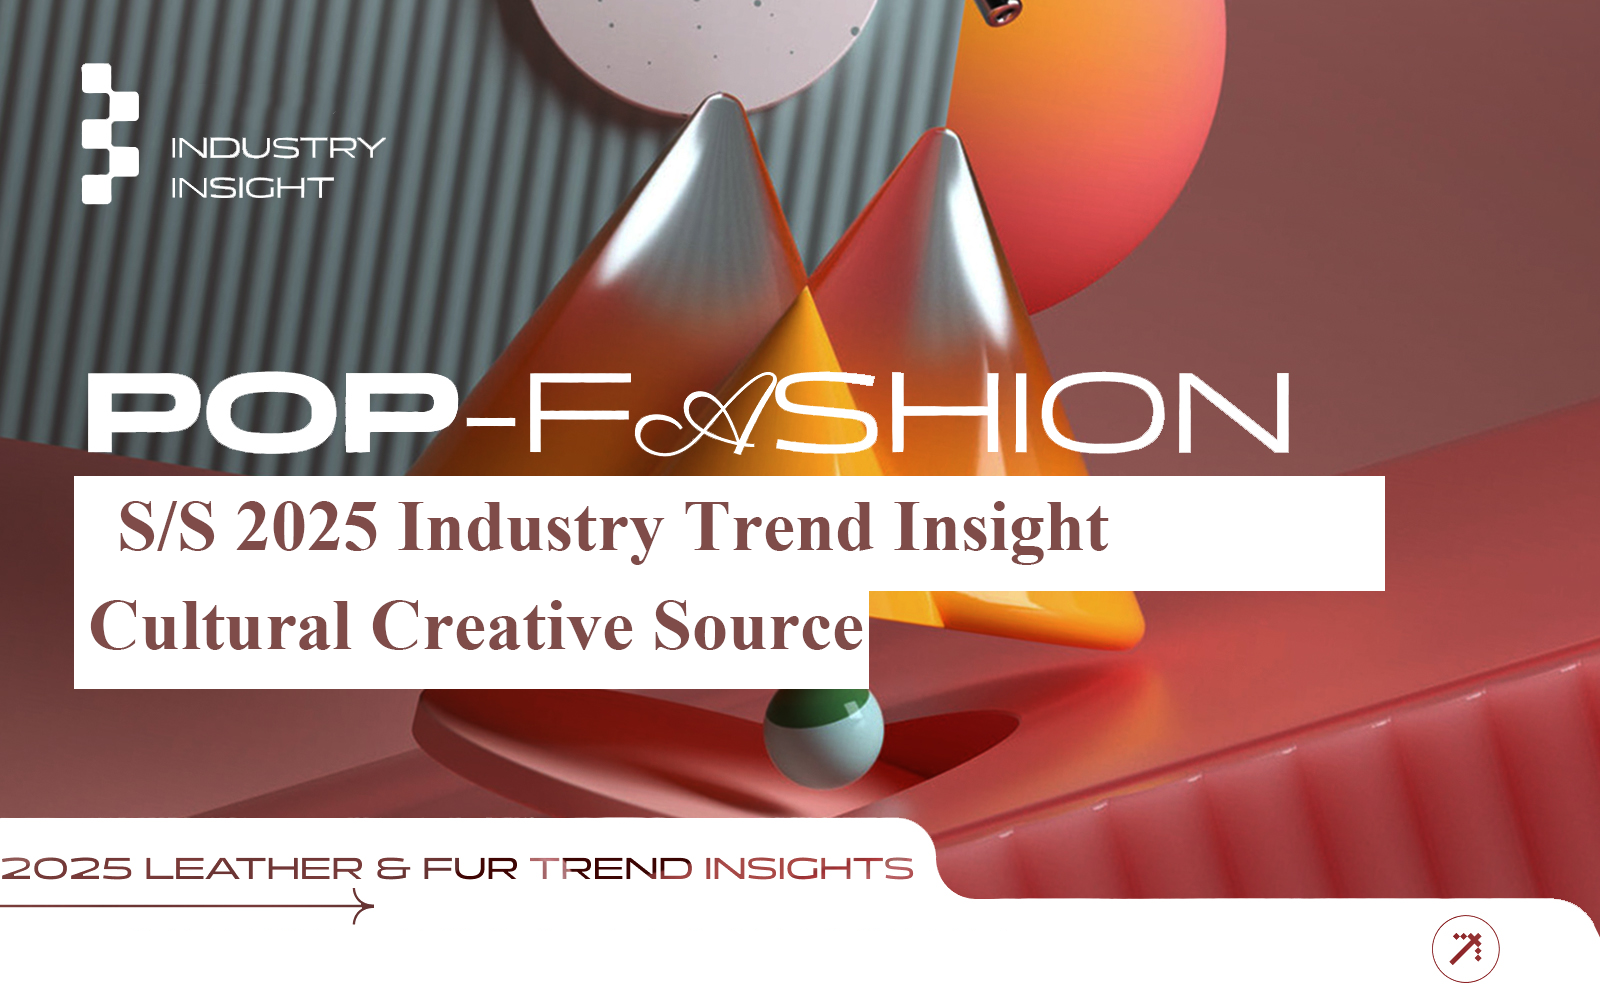 S/S 2025 Industry Trend Insight -- Cultural Creative Sources